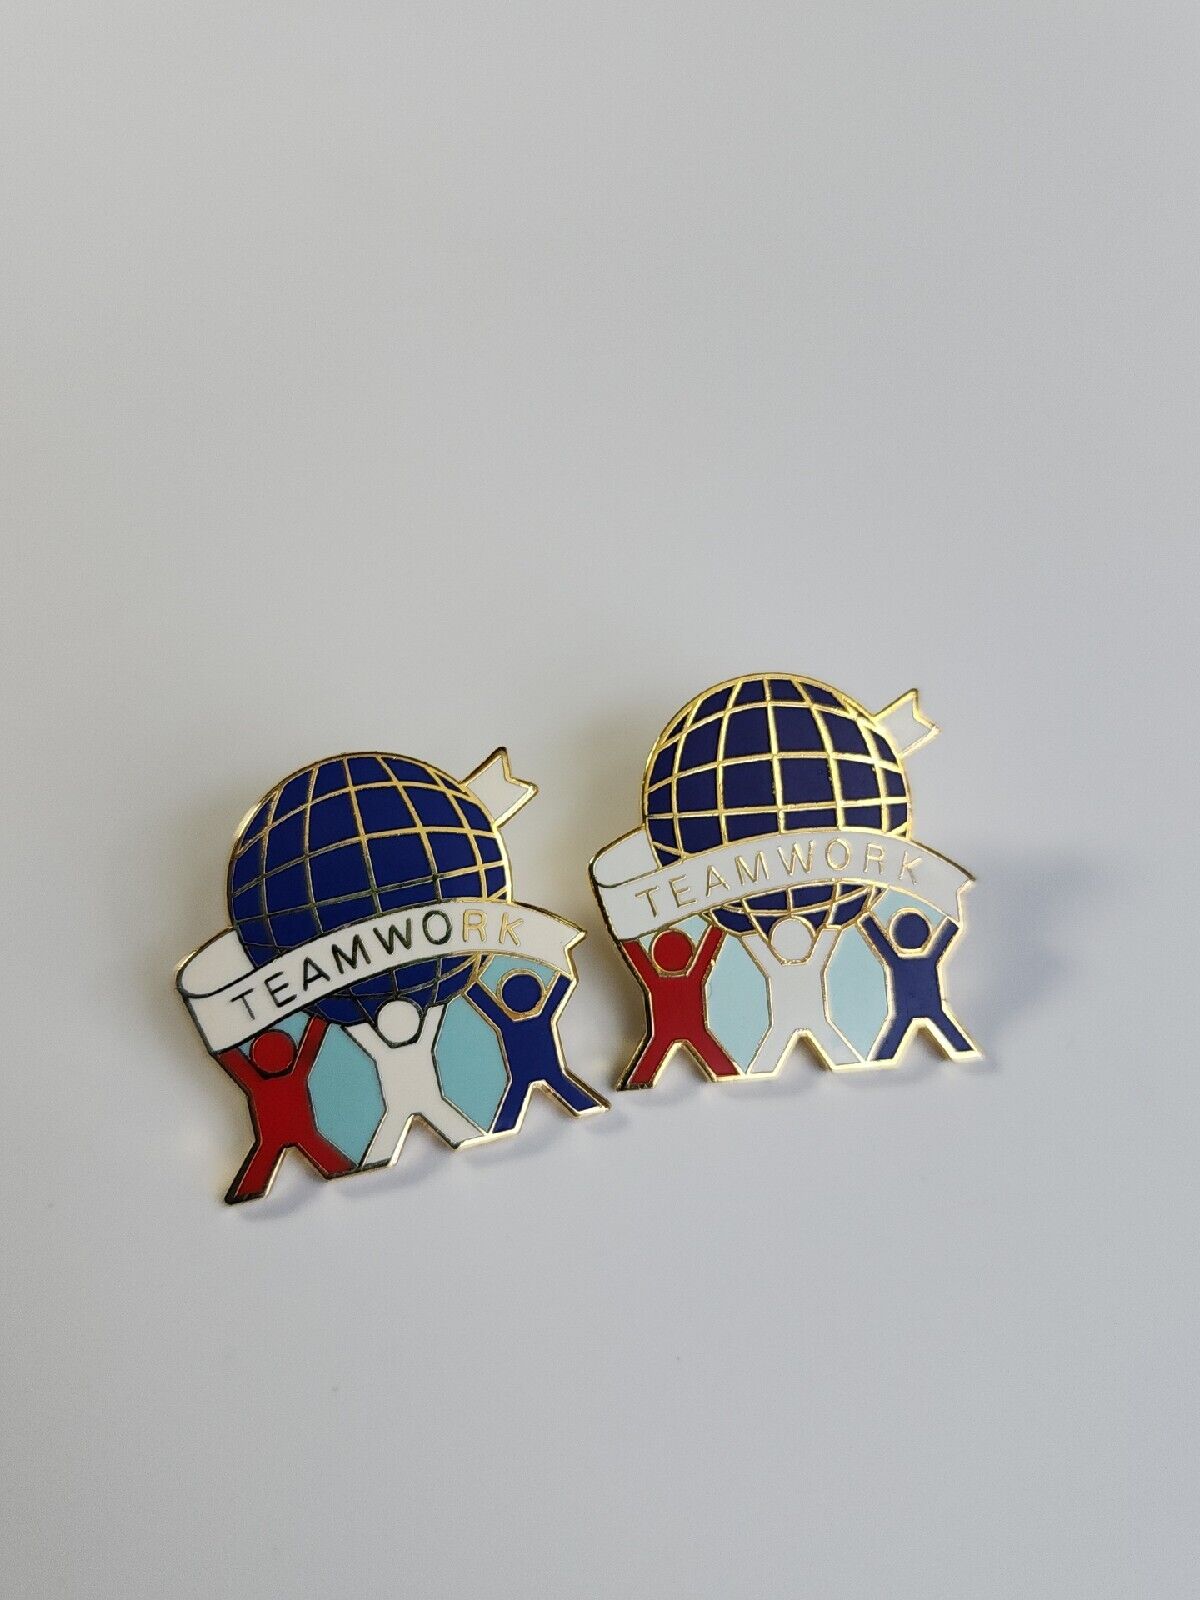 Teamwork Lapel Pin Lot Of 2 Red White & Blue People Holding Globe